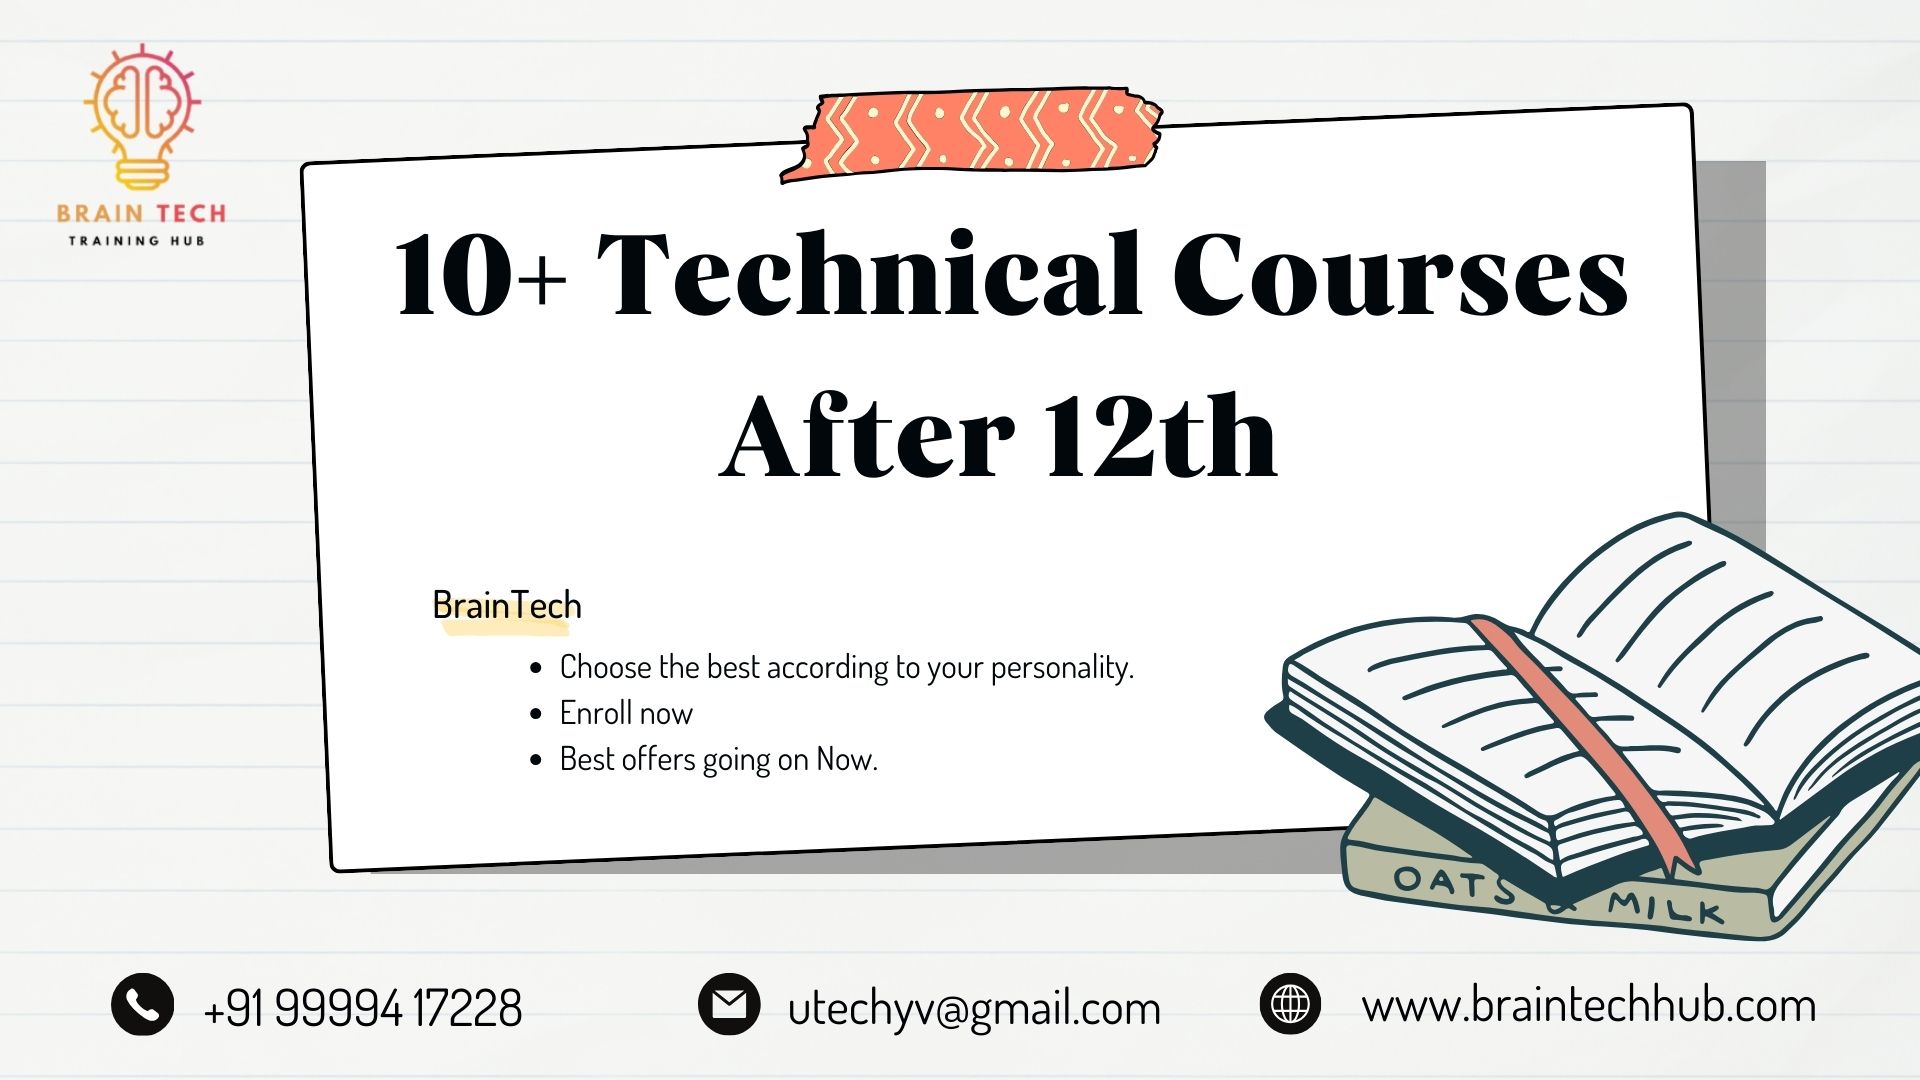 10+ Technical Courses After 12th